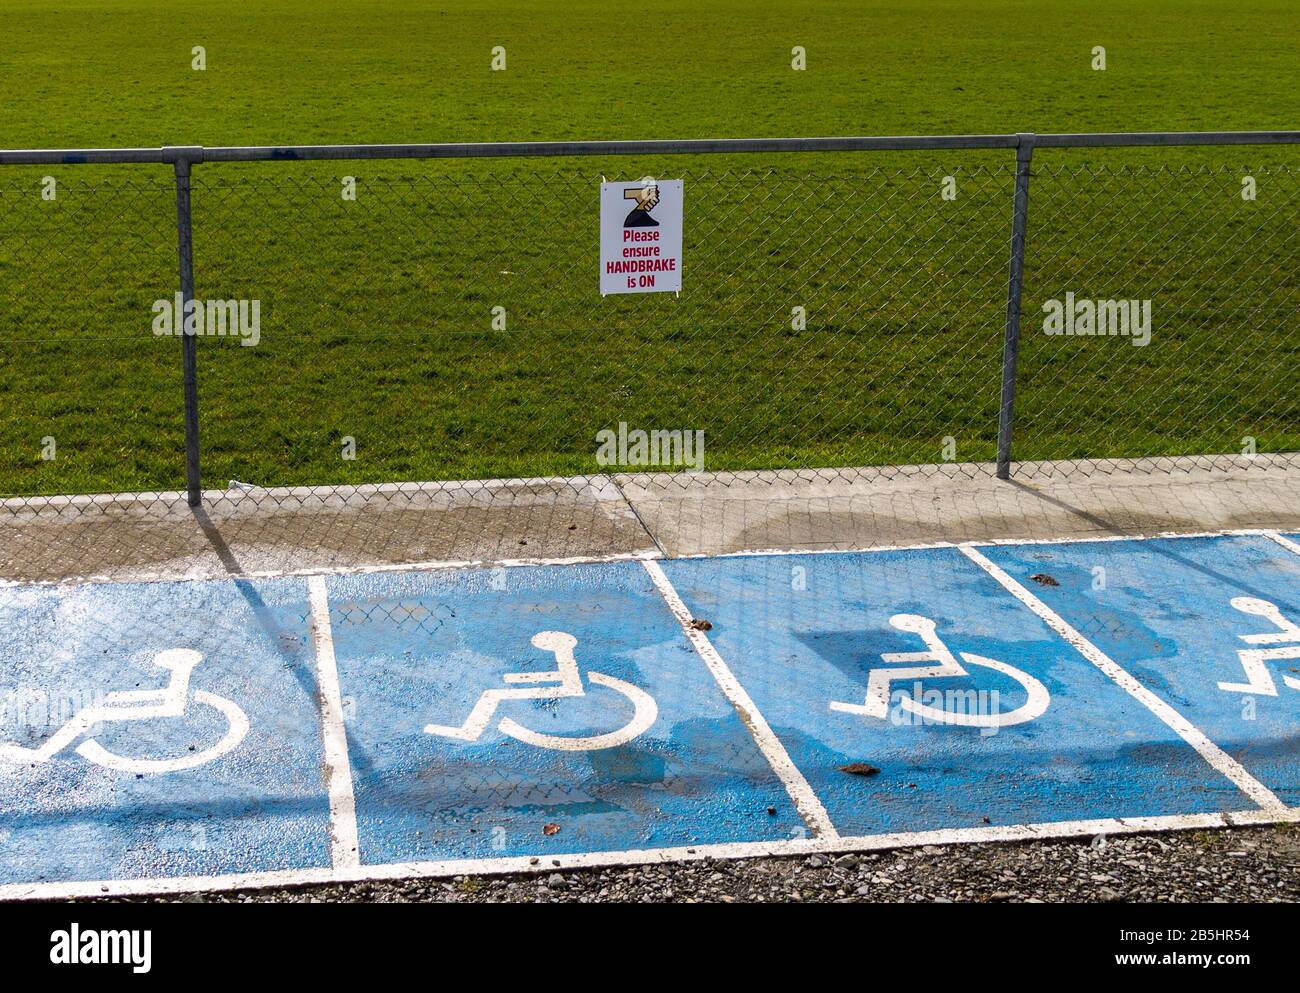 Apply handbrake sign in disabled parking area. Stock Photo